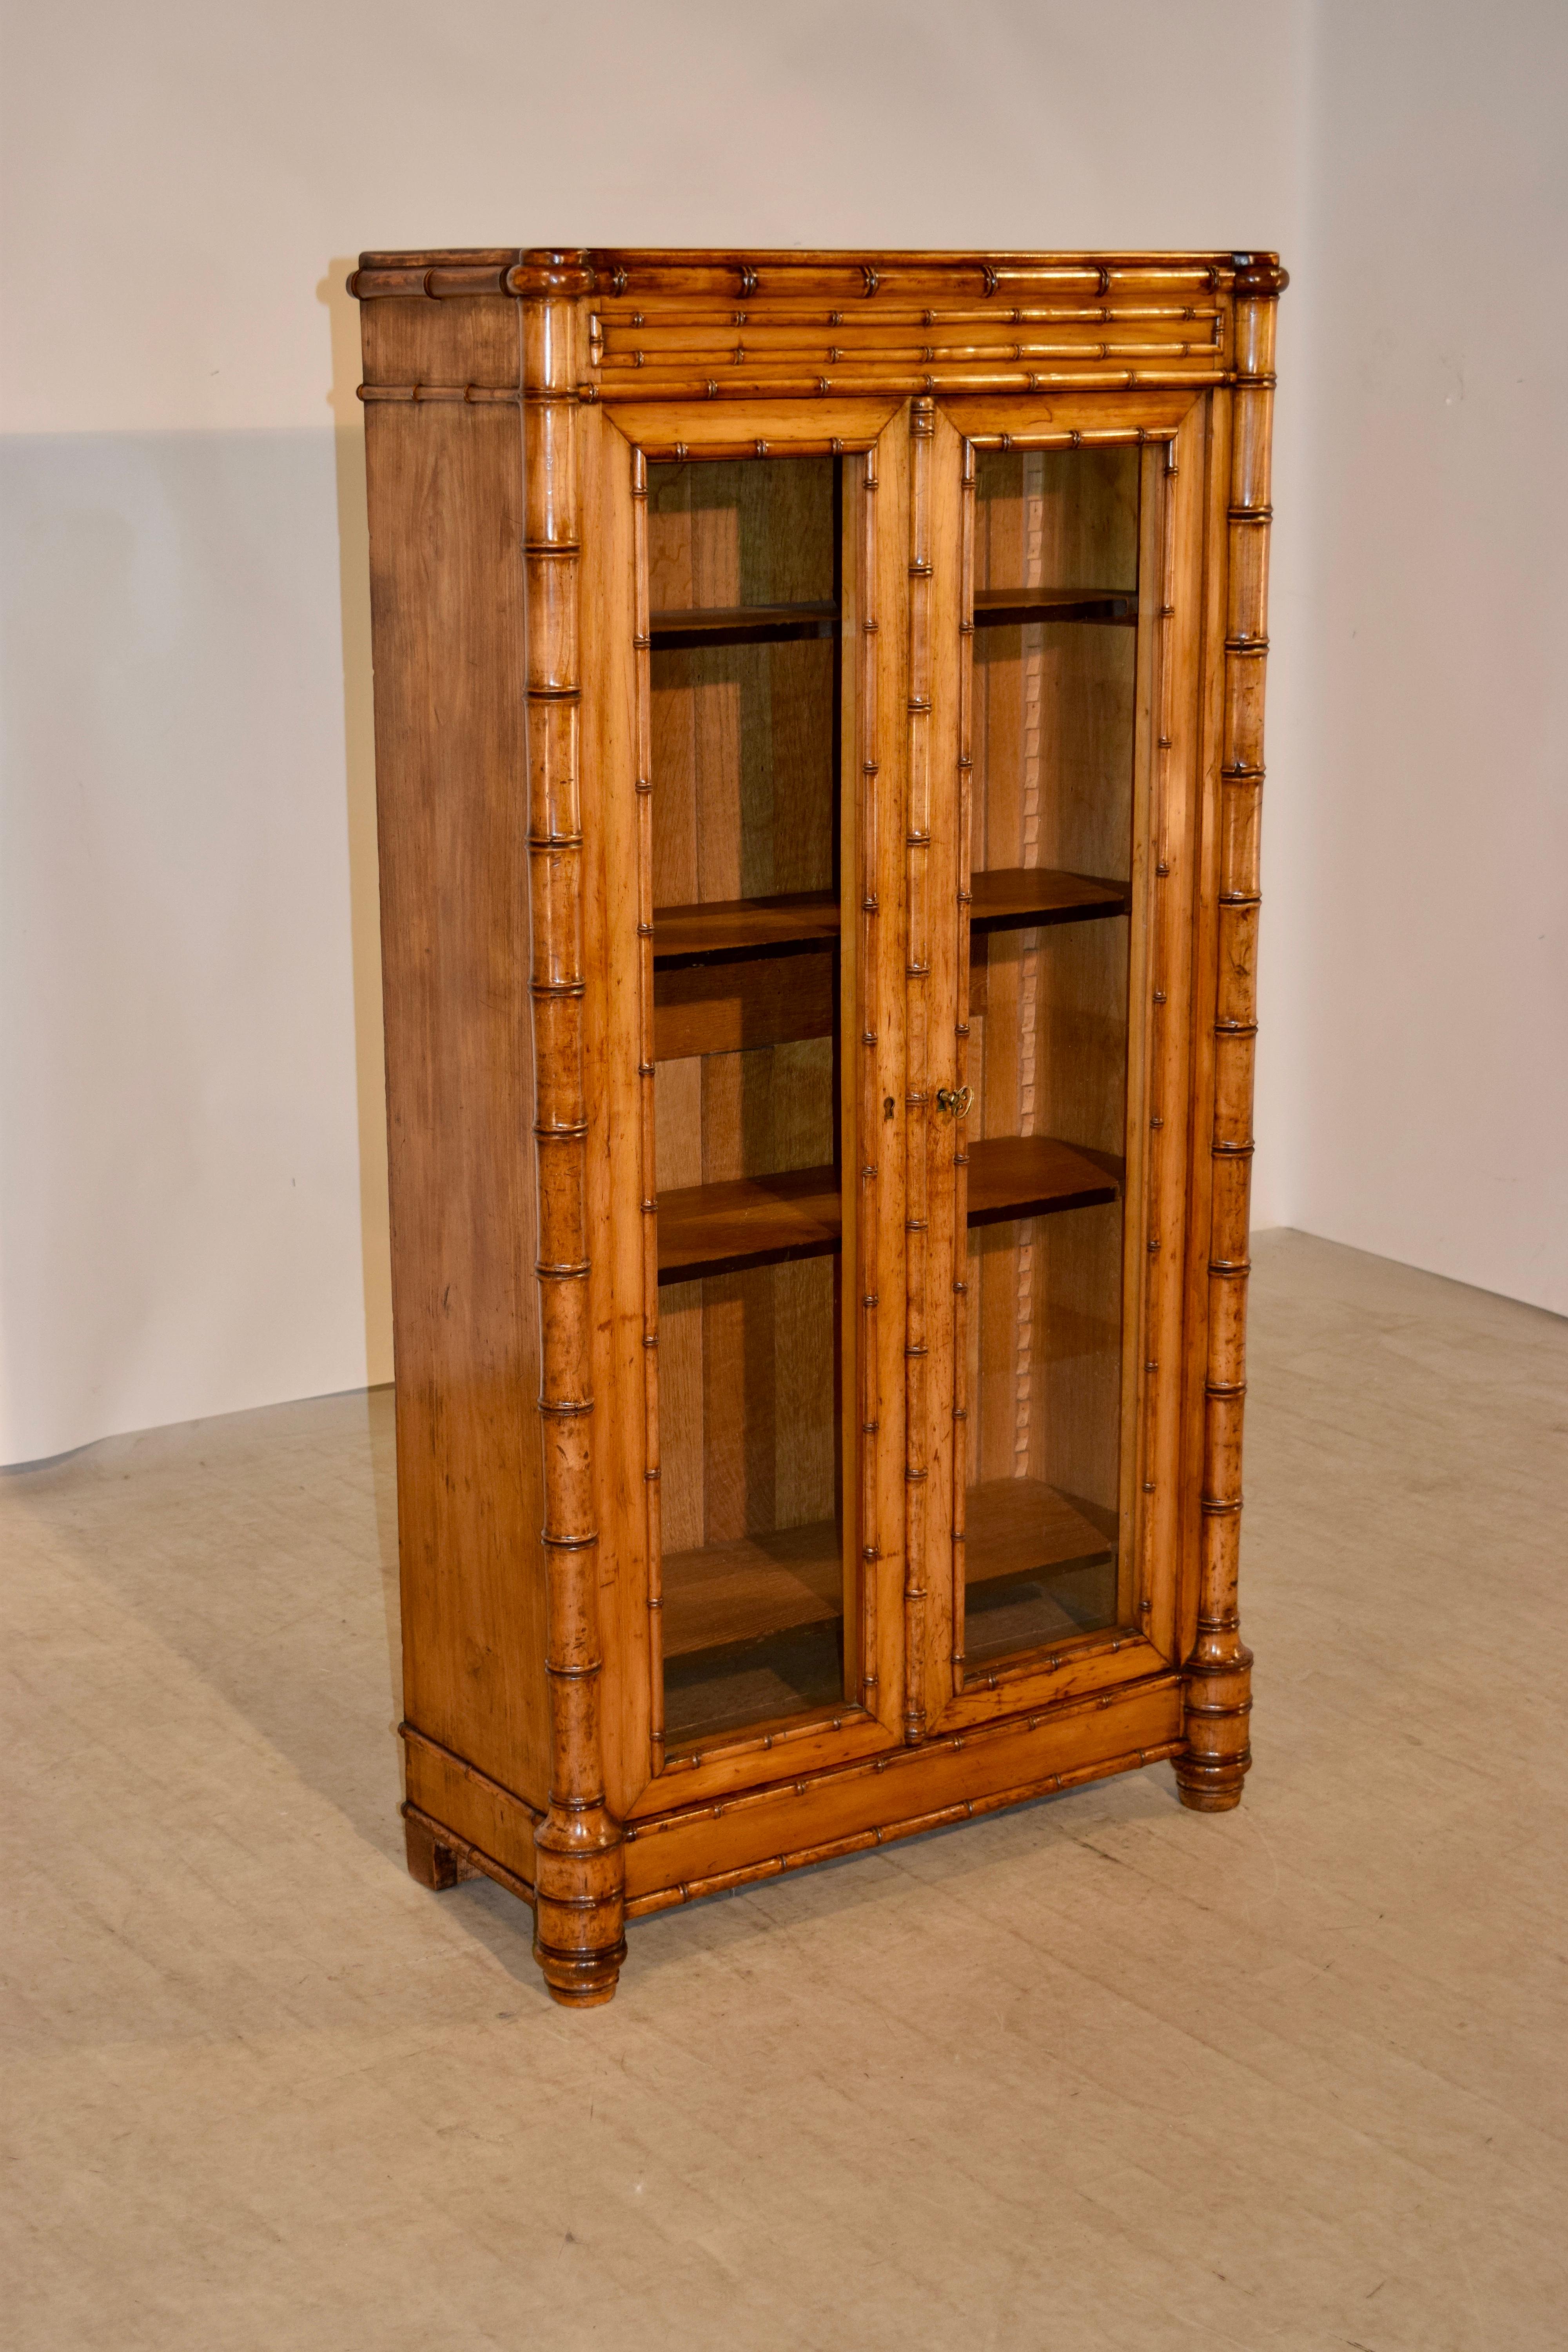 19th century bookcase from France made of cherry with simple sides embellished with faux bamboo turned moldings and round faux bamboo turned columns on the front corners which end in interesting hand-turned graduated feet, also hand-turned in the